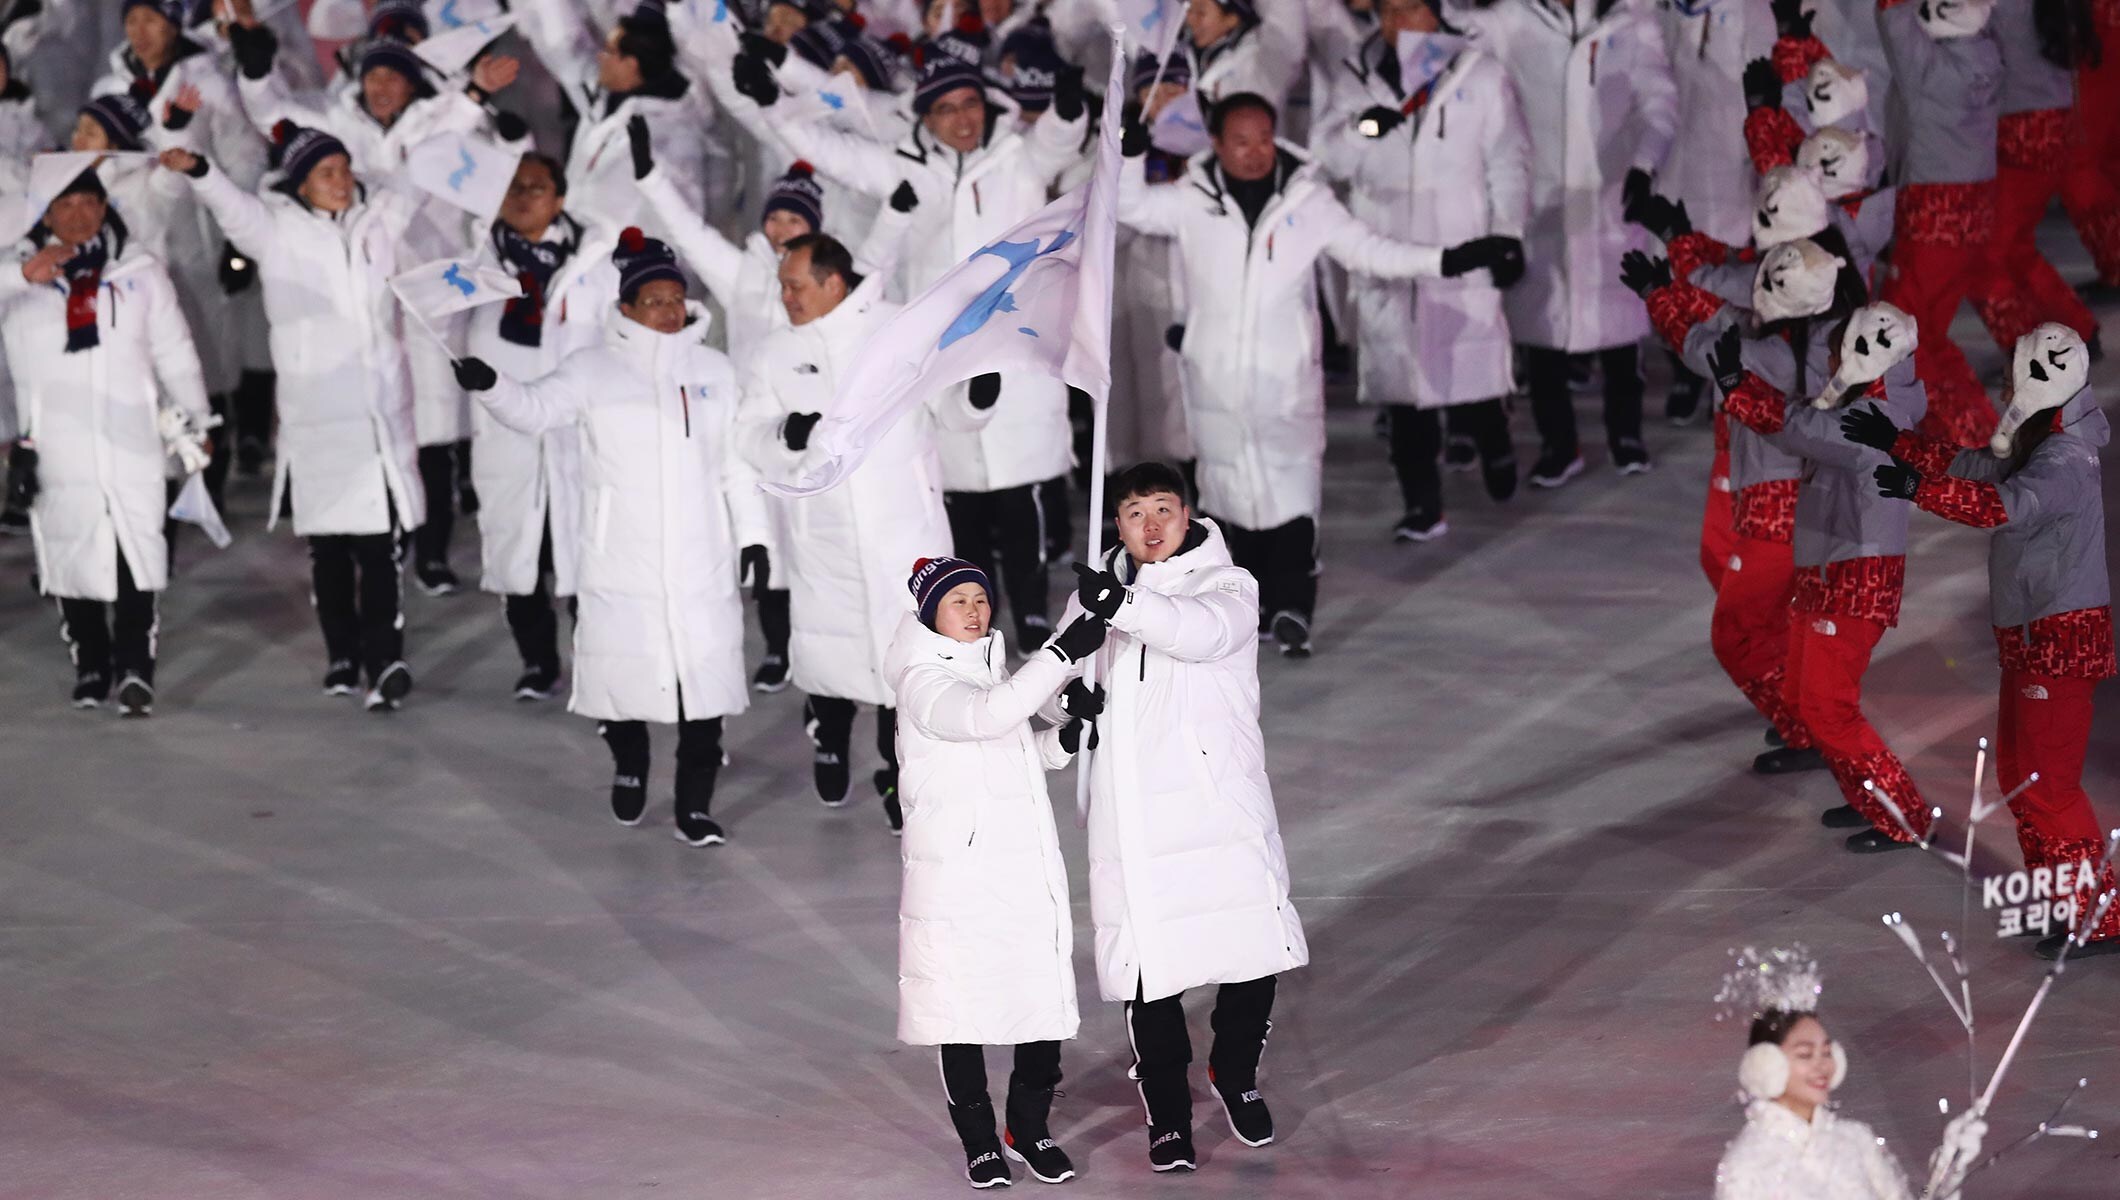 The Unified Korean Team at the 2018 Winter Olympics Opening Ceremony in Pyeongchang (IOC)